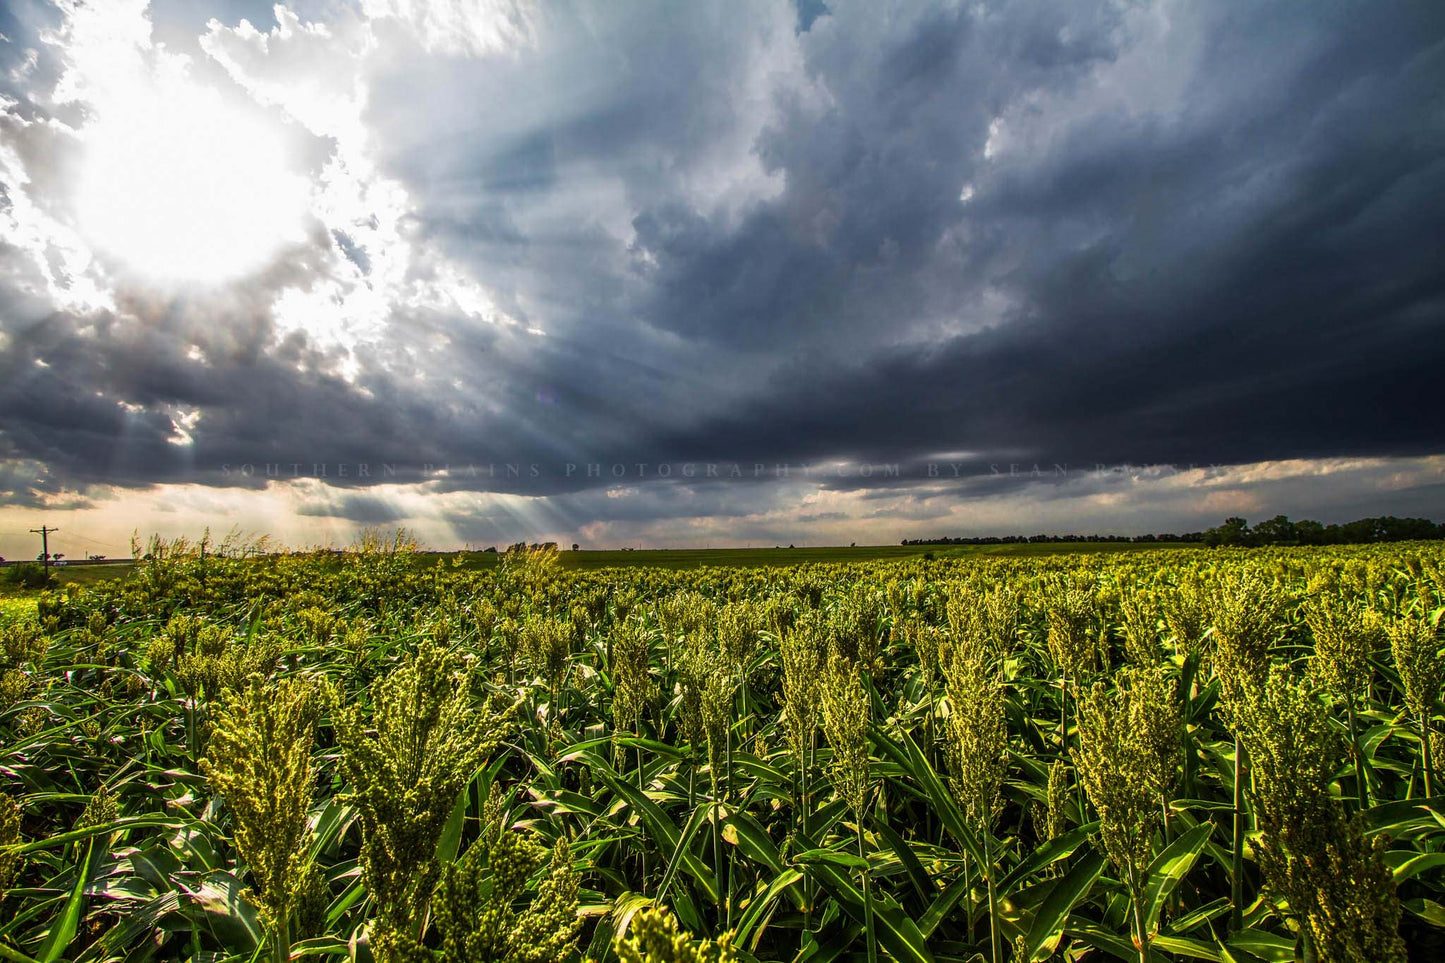 Farm photography print of sunlight shining down on a maize field on a stormy late summer day in Kansas by Sean Ramsey of Southern Plains Photography.